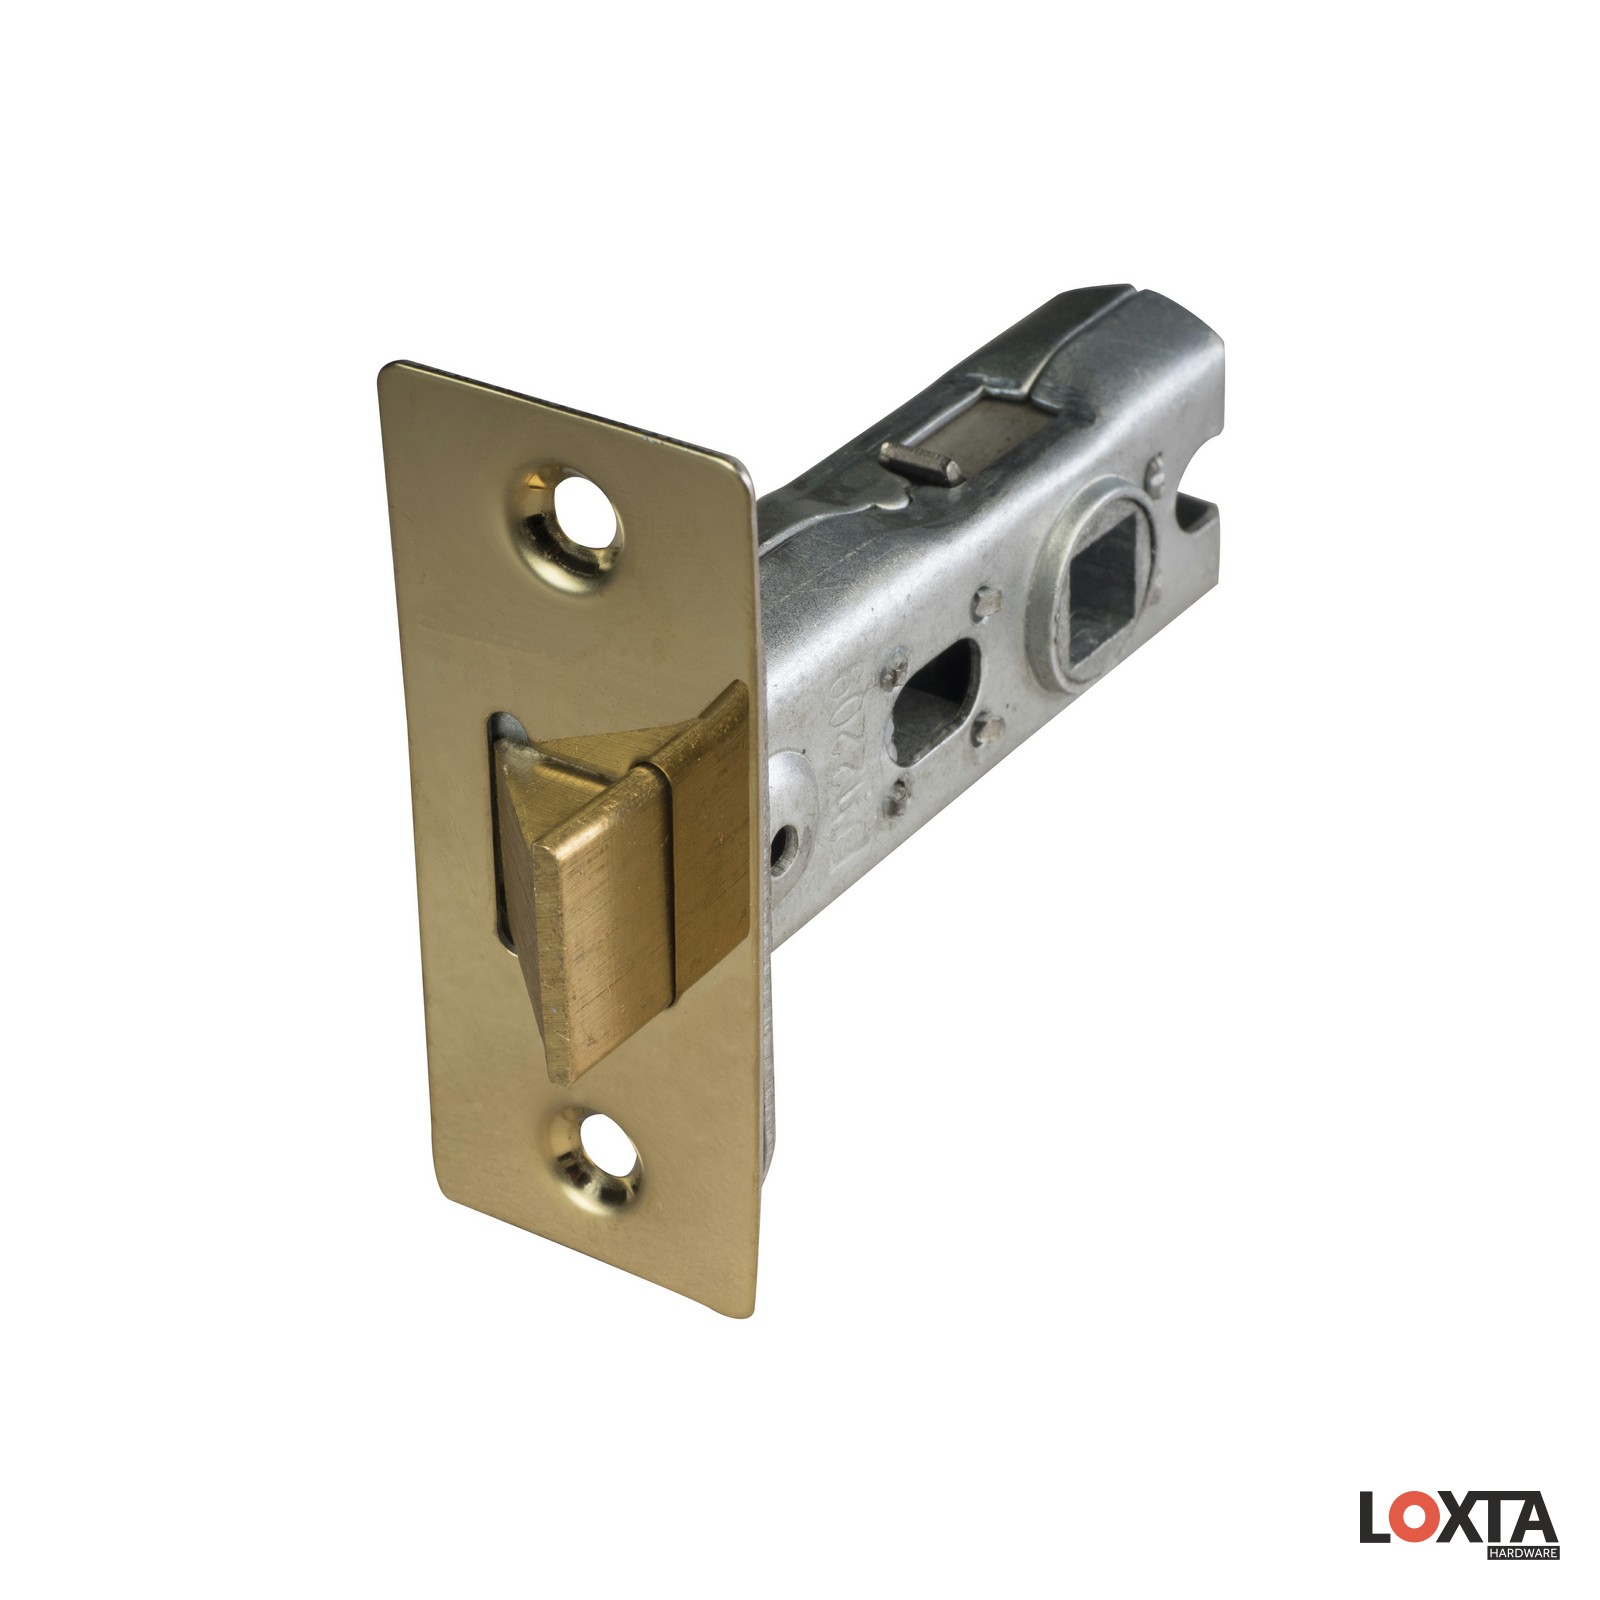 KT55599 Square Tubular Mortice Door Latch with Bolt Through